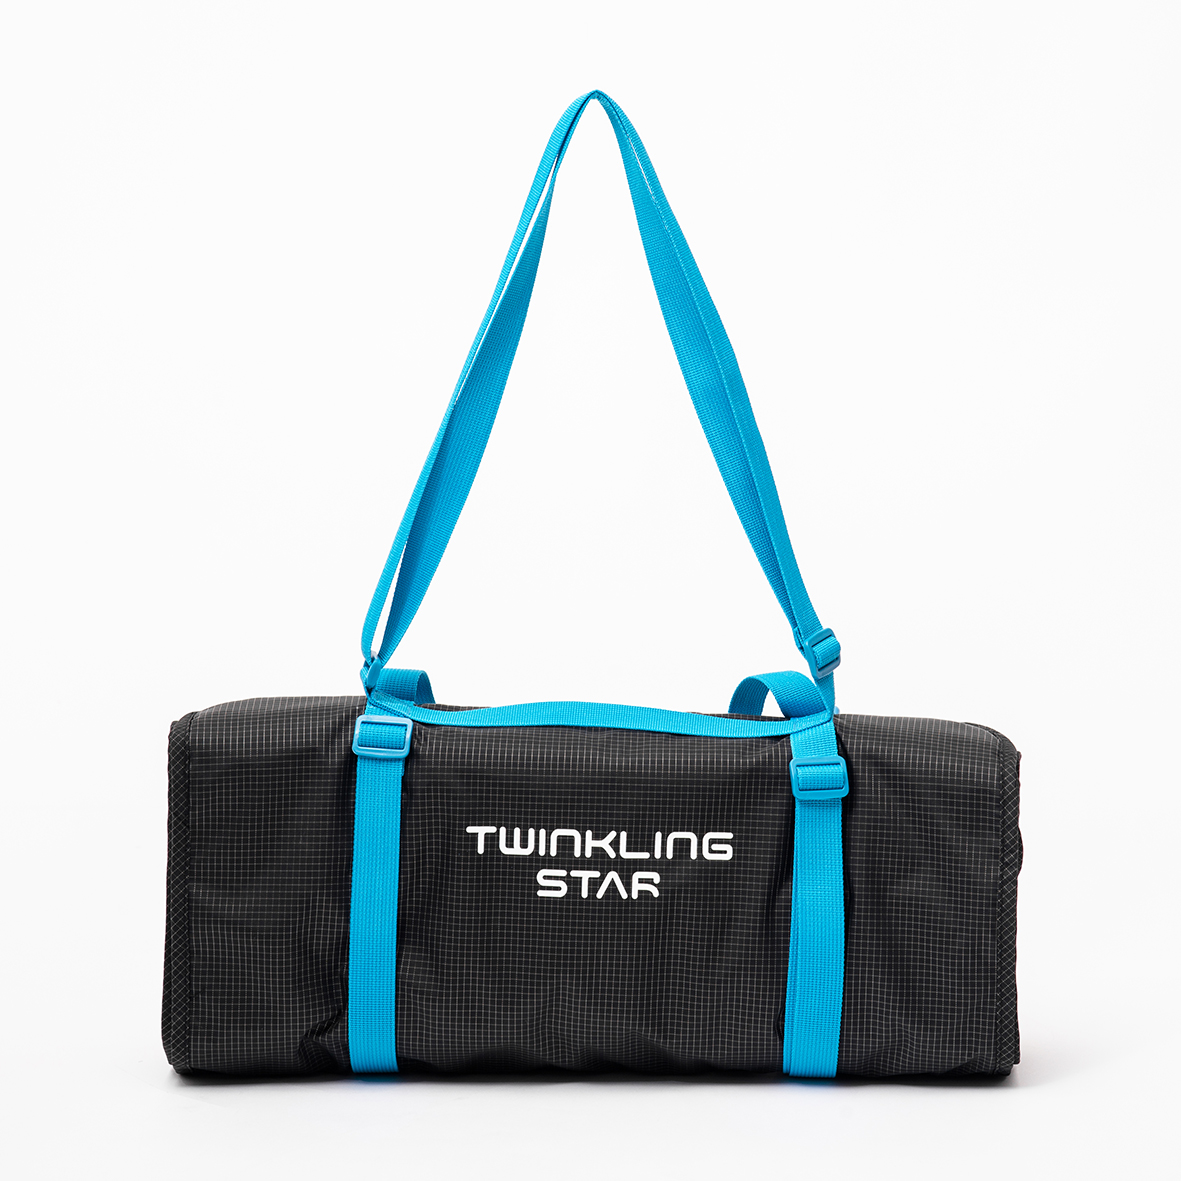 Factory Price For Shoulder Bag For Outdoor - New design portable and stylish multi-compartment with large capacity rolled up travel bag large size – Twinkling Star